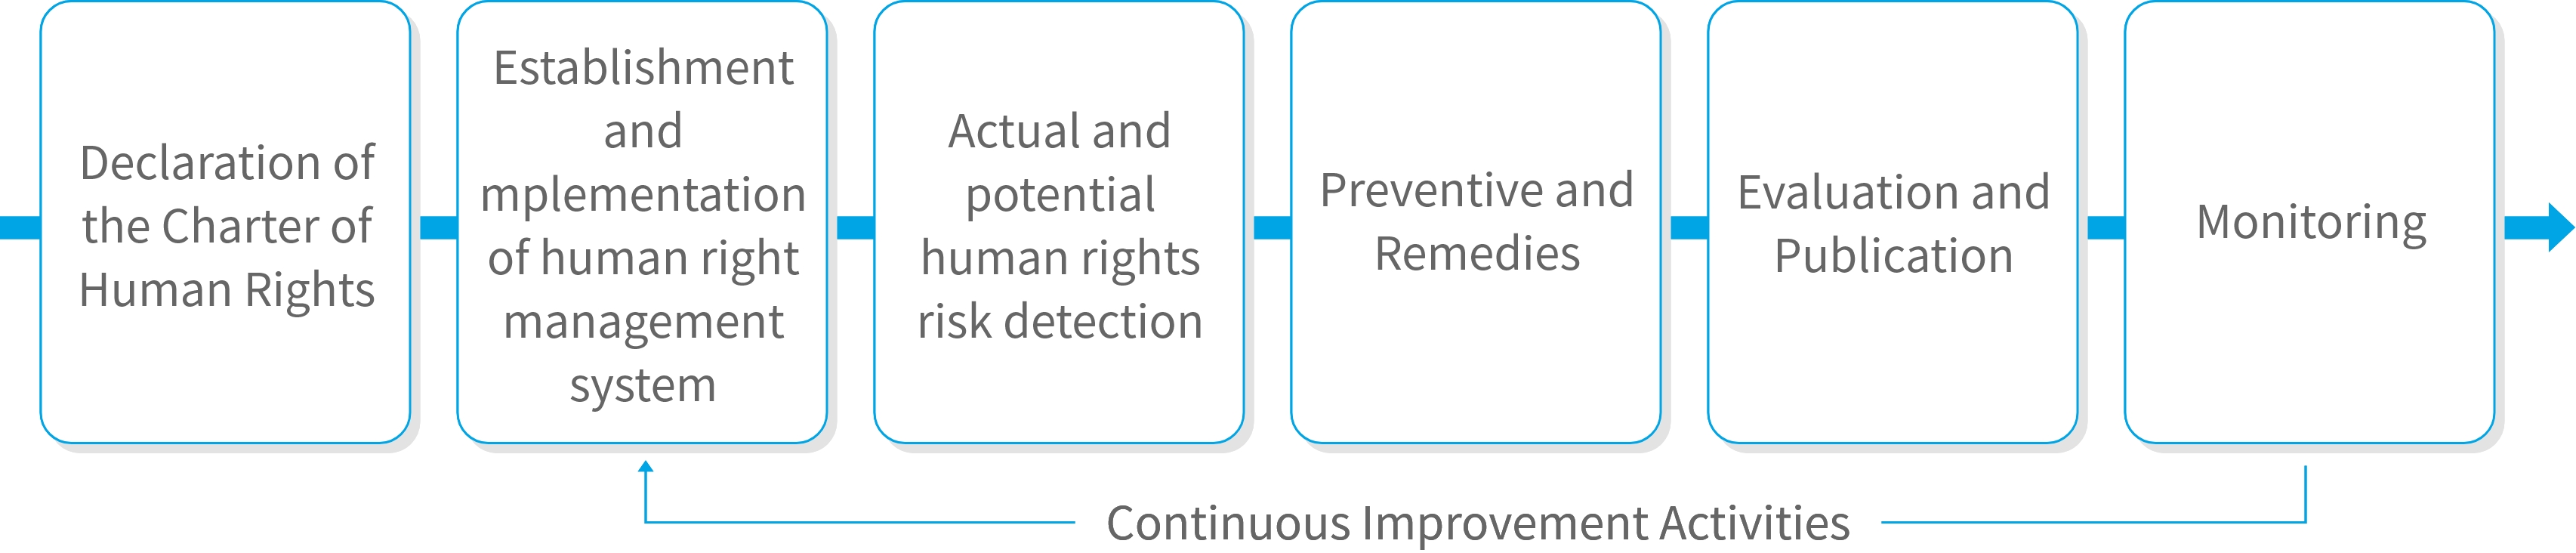 Risk Management Process of Human Rights